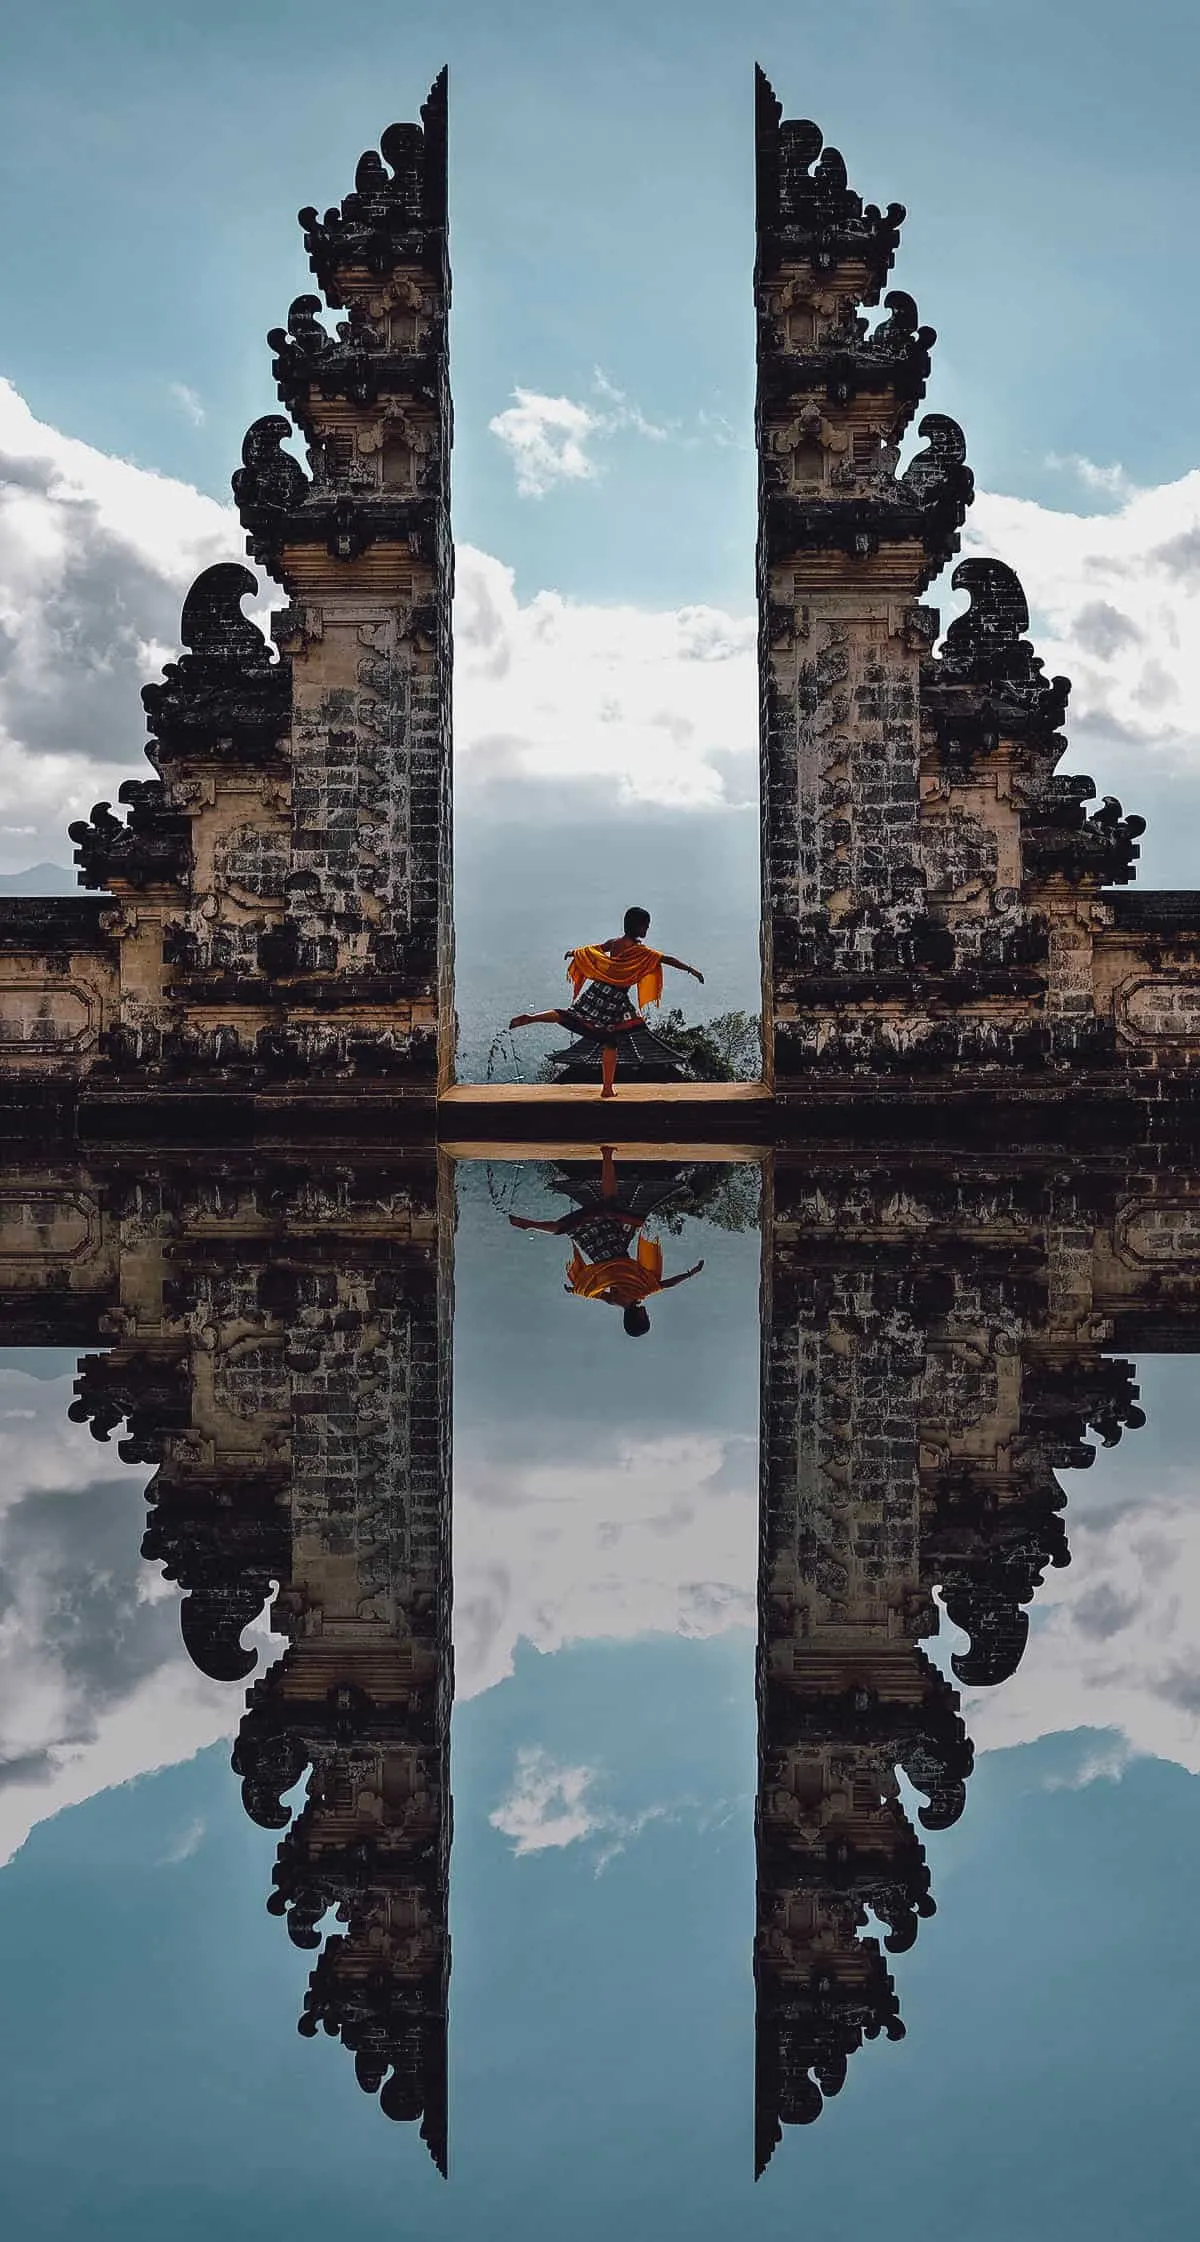 Travel guide to Ubud: Woman posing at the Gate of Heaven in Bali